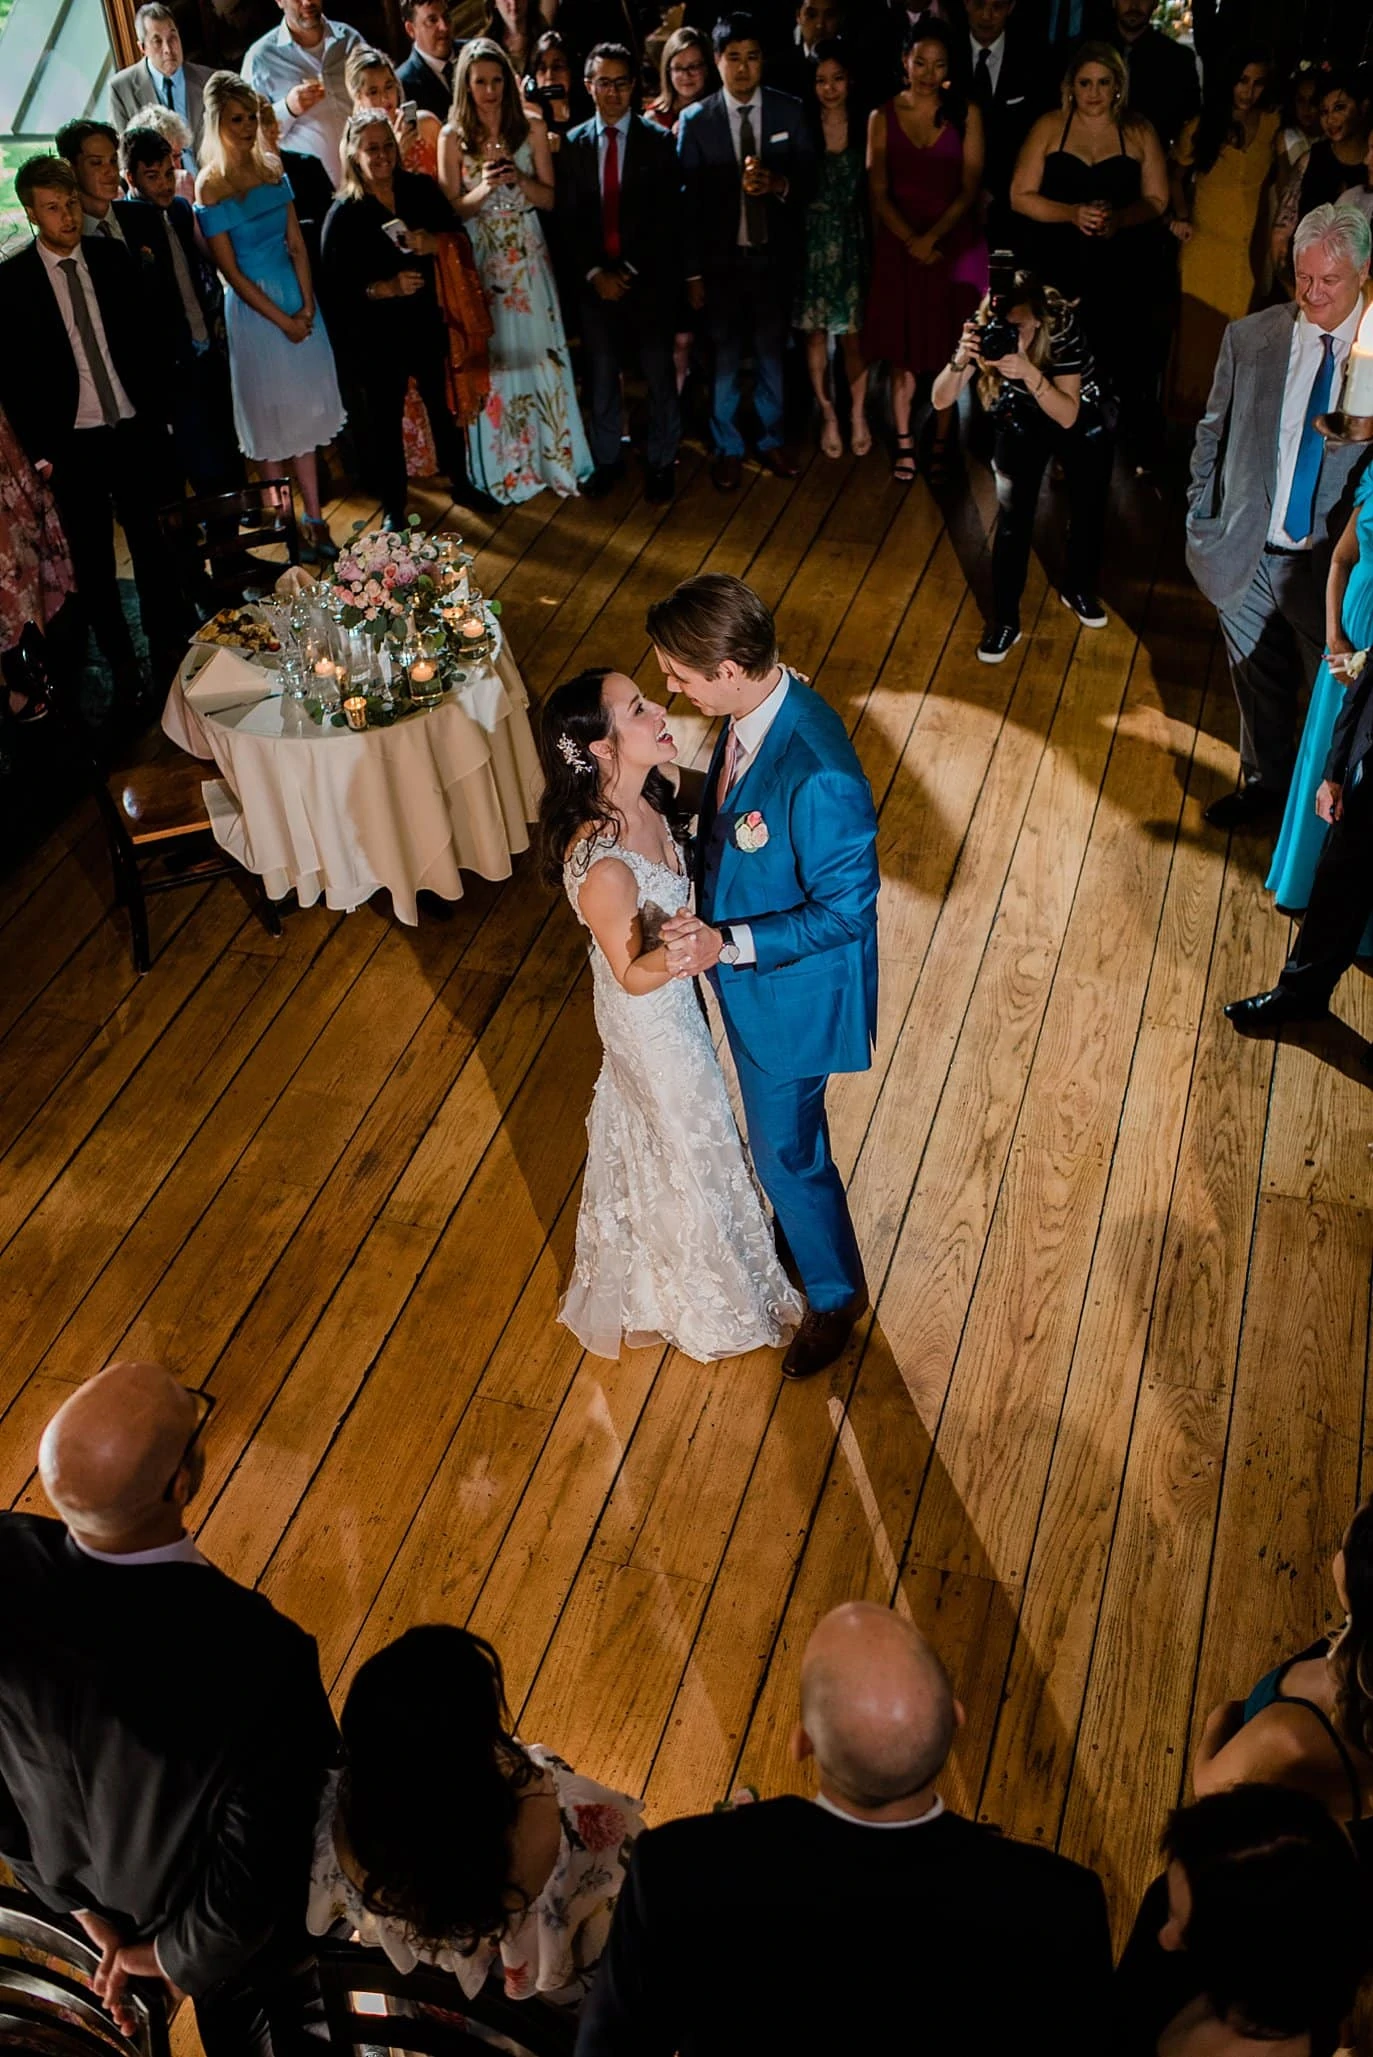 bride and groom first dance photo from above at t Twin Owls Steakhouse wedding by Estes Park wedding photographer Jennie Crate photographer